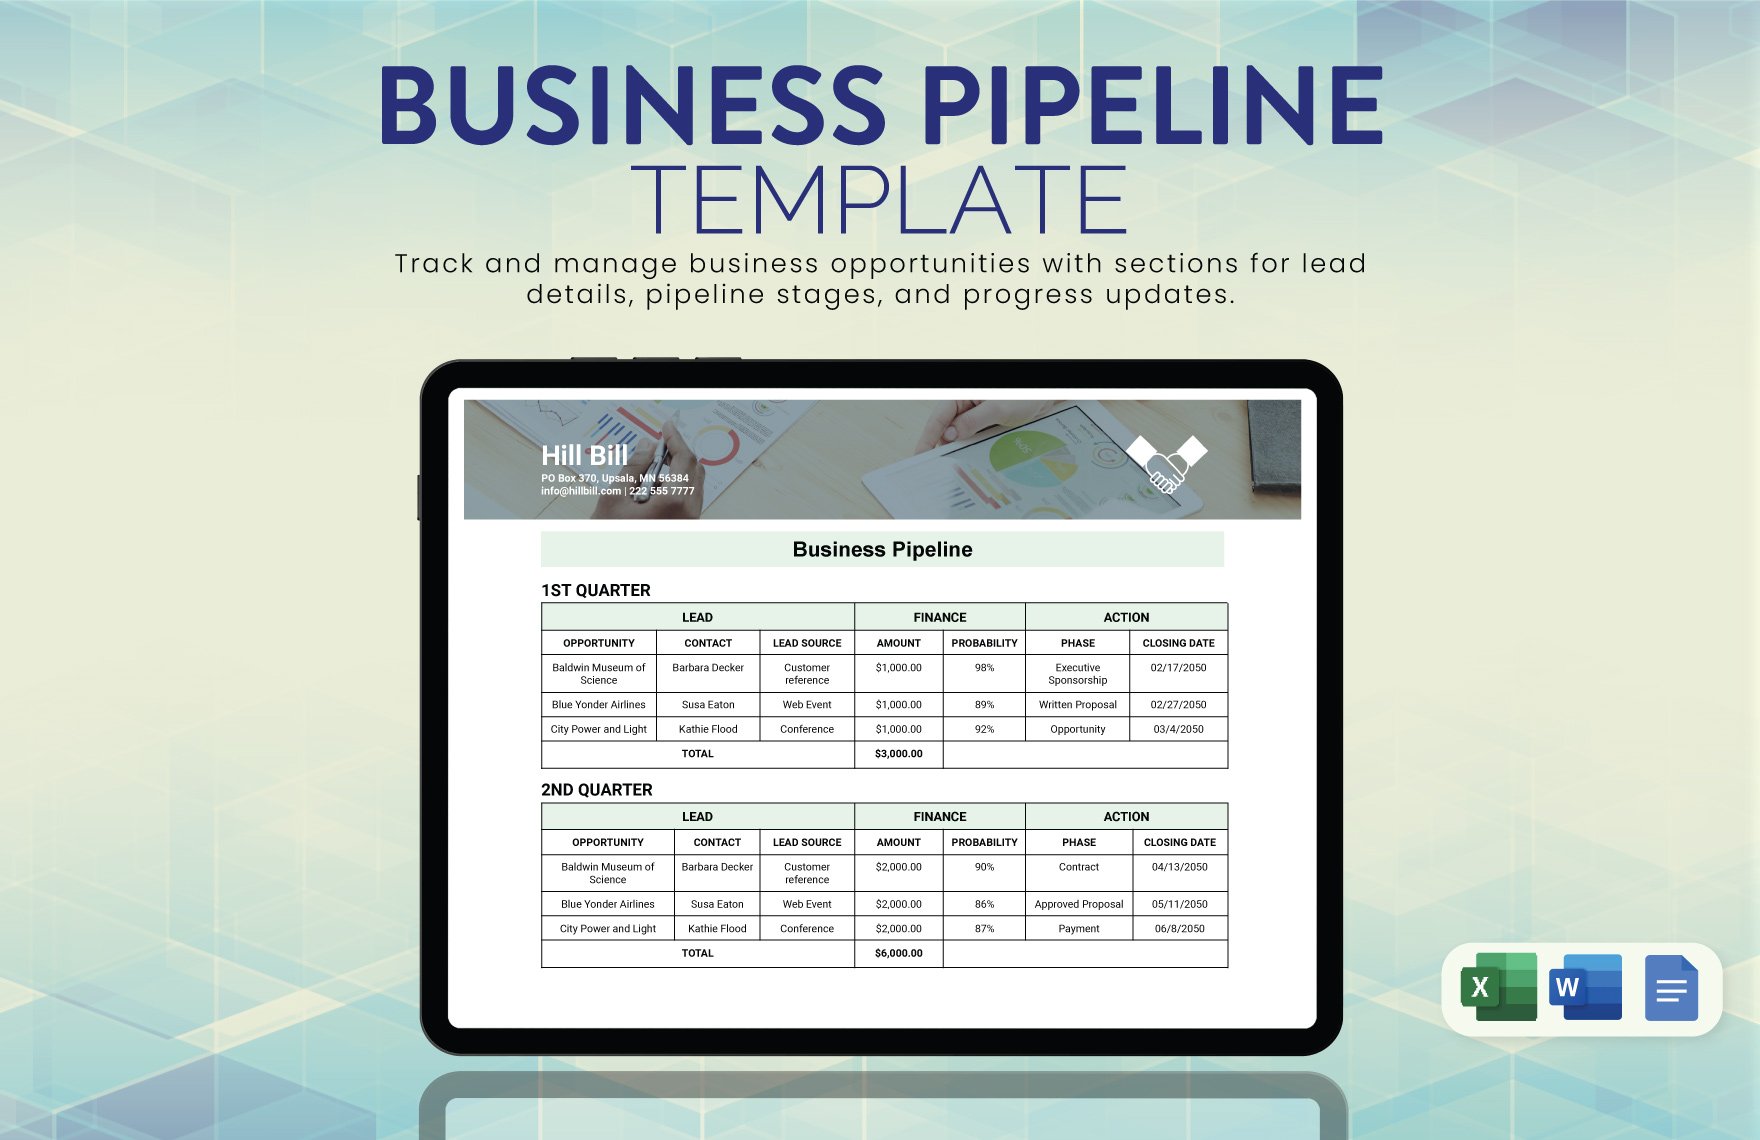 Business Pipeline Template in Word, Google Docs, Excel